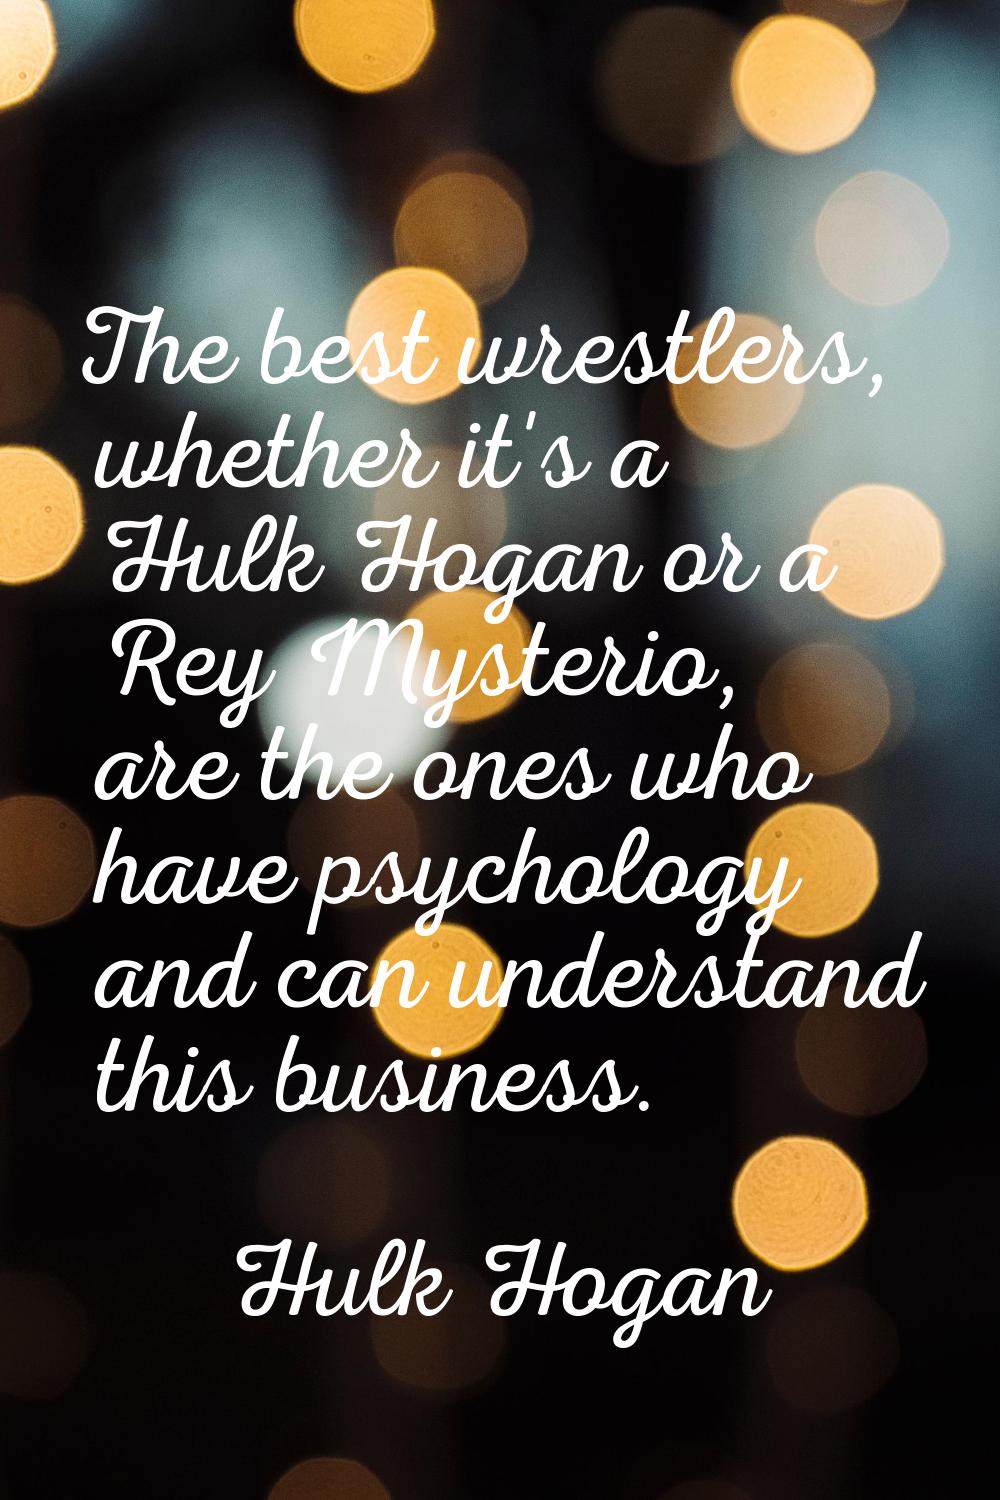 The best wrestlers, whether it's a Hulk Hogan or a Rey Mysterio, are the ones who have psychology a